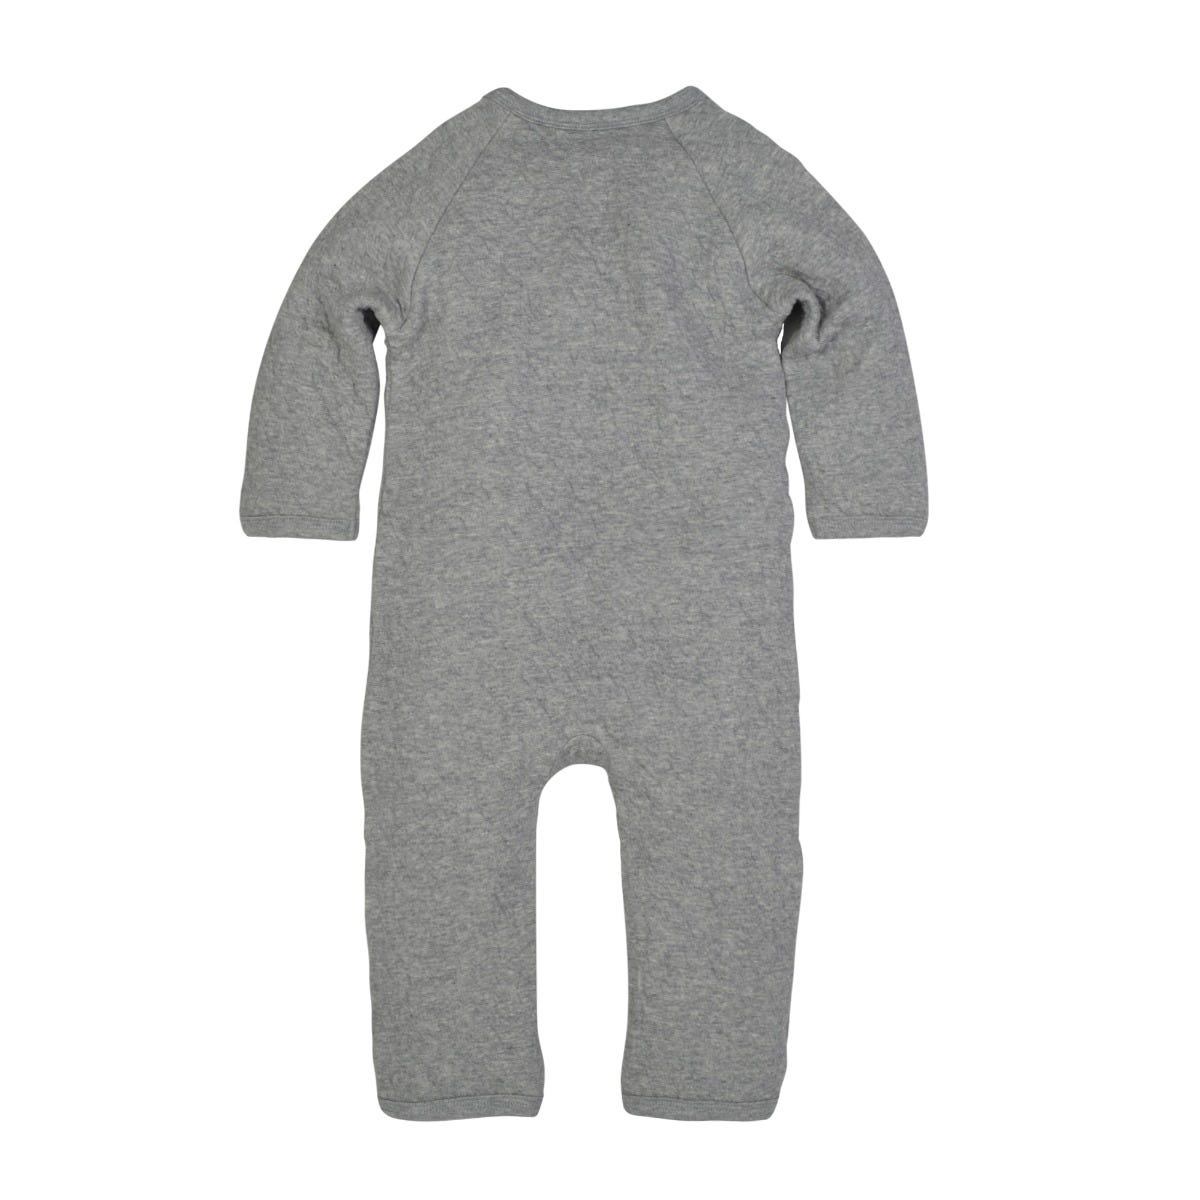 Burts Bees Baby Boy Girl Organic Coverall Hat Set Size 3 6 9 Months Layette Grey 